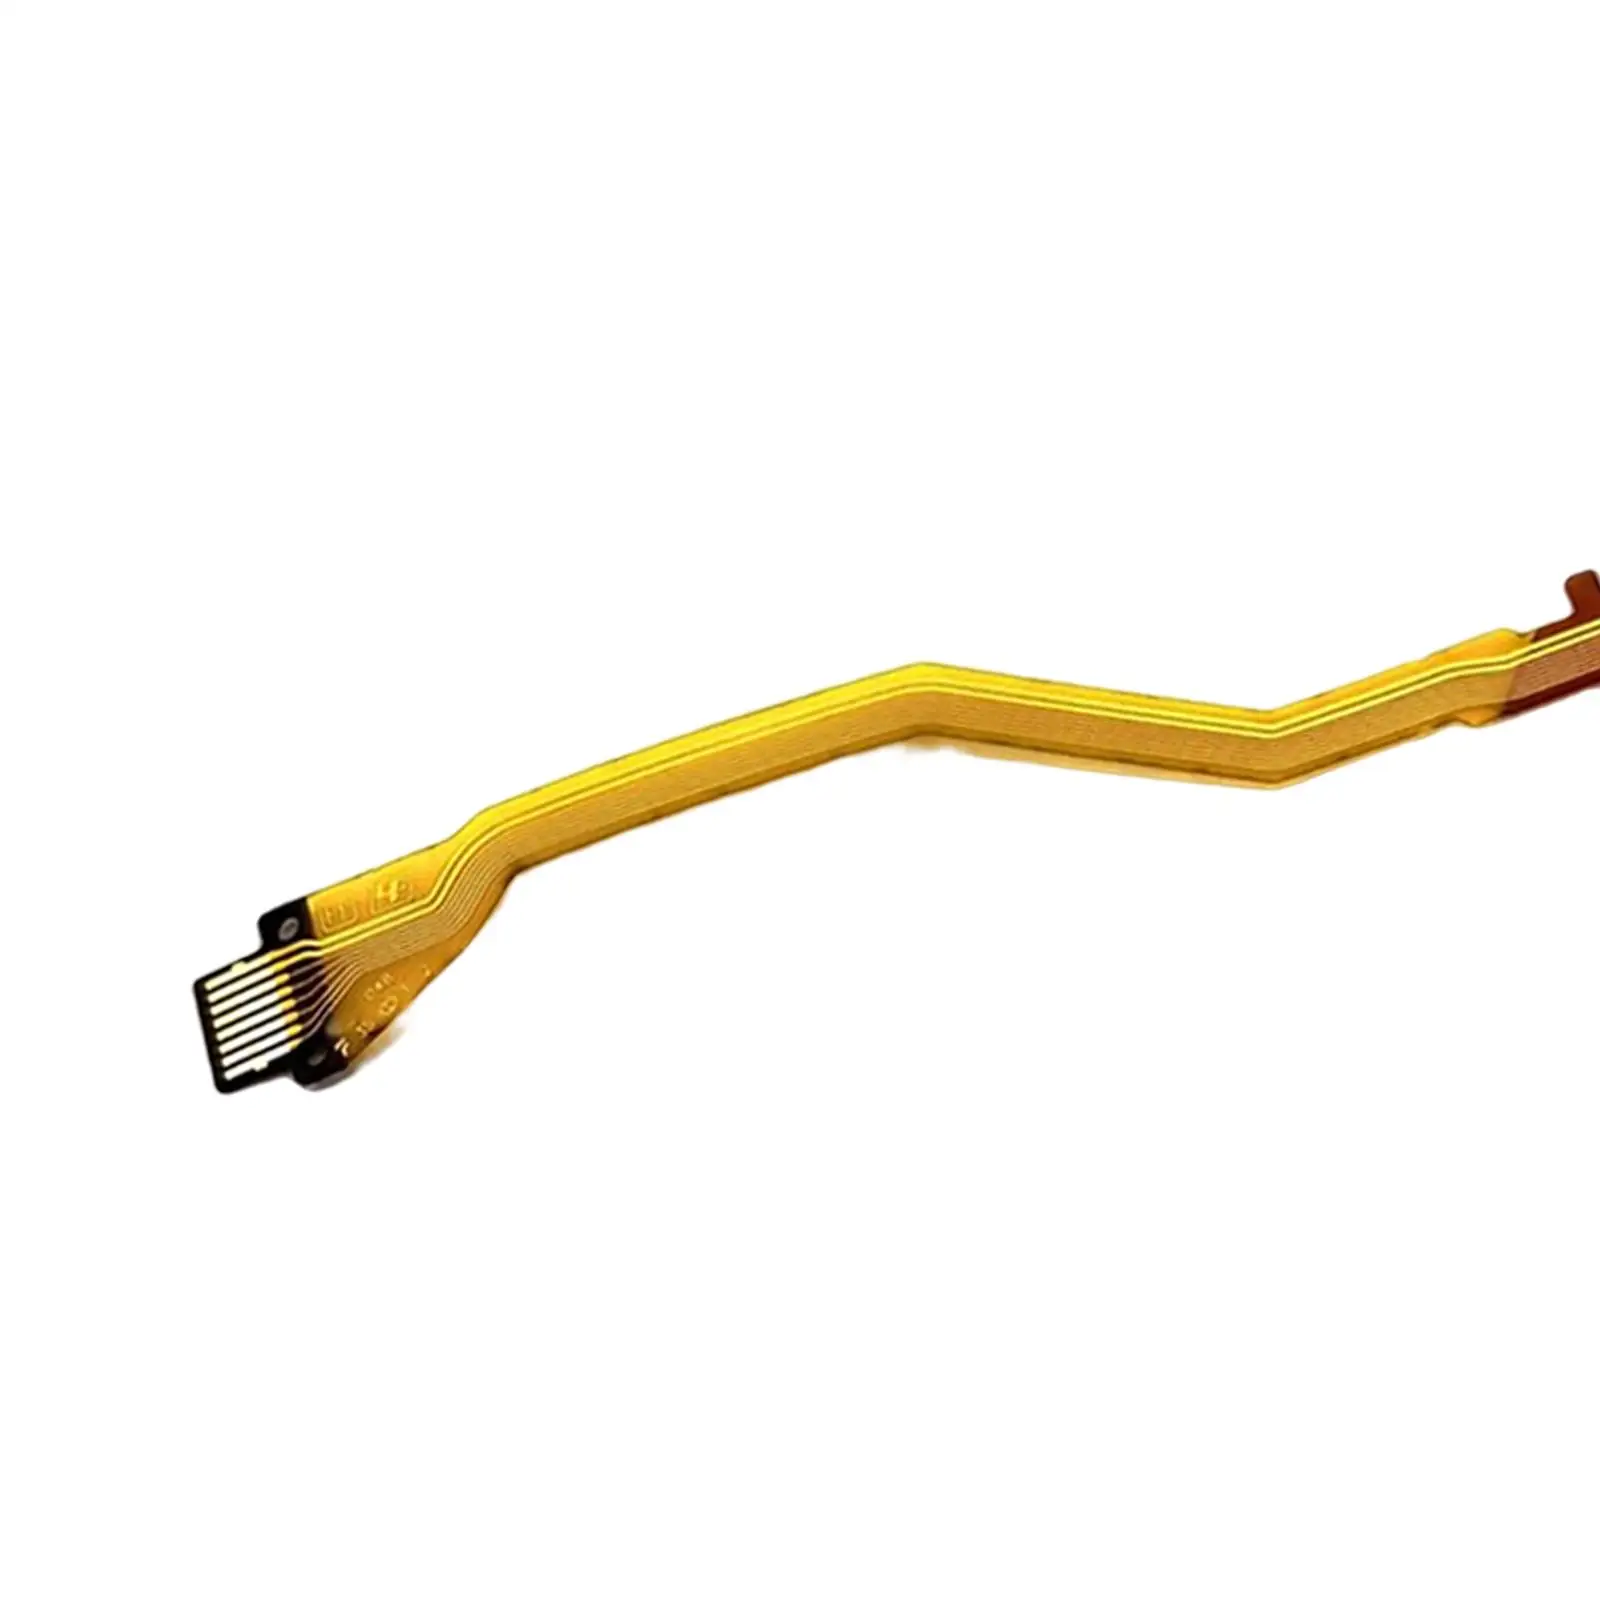 Yellow Lens Flex Cable Replacement Repair Parts Accessories Digital Camera High Quality Focusing Flex Cable for RX100M6 RX100M7